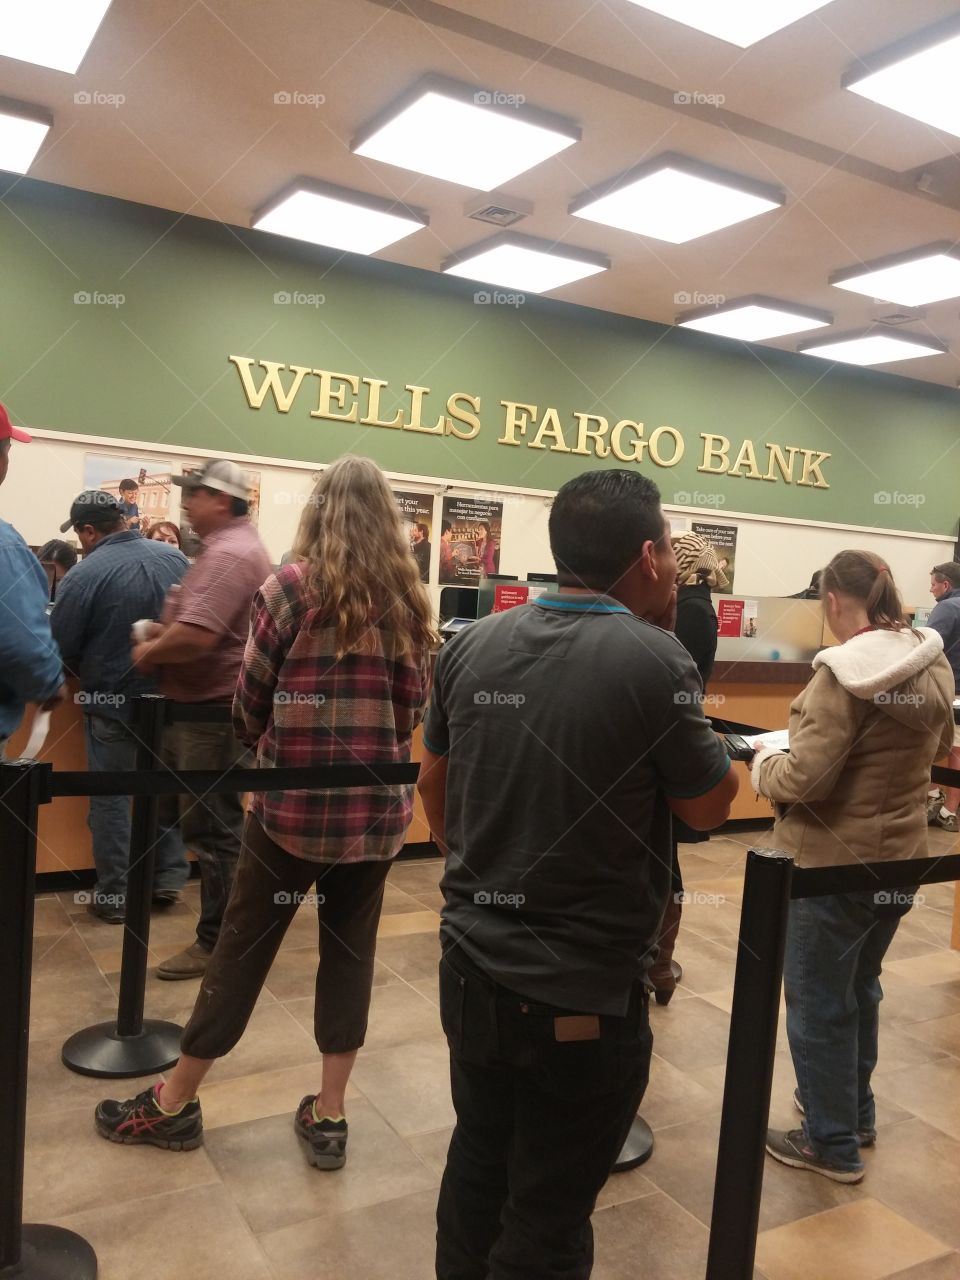 Banking at Wells Fargo. just waiting in line at Wells Fargo